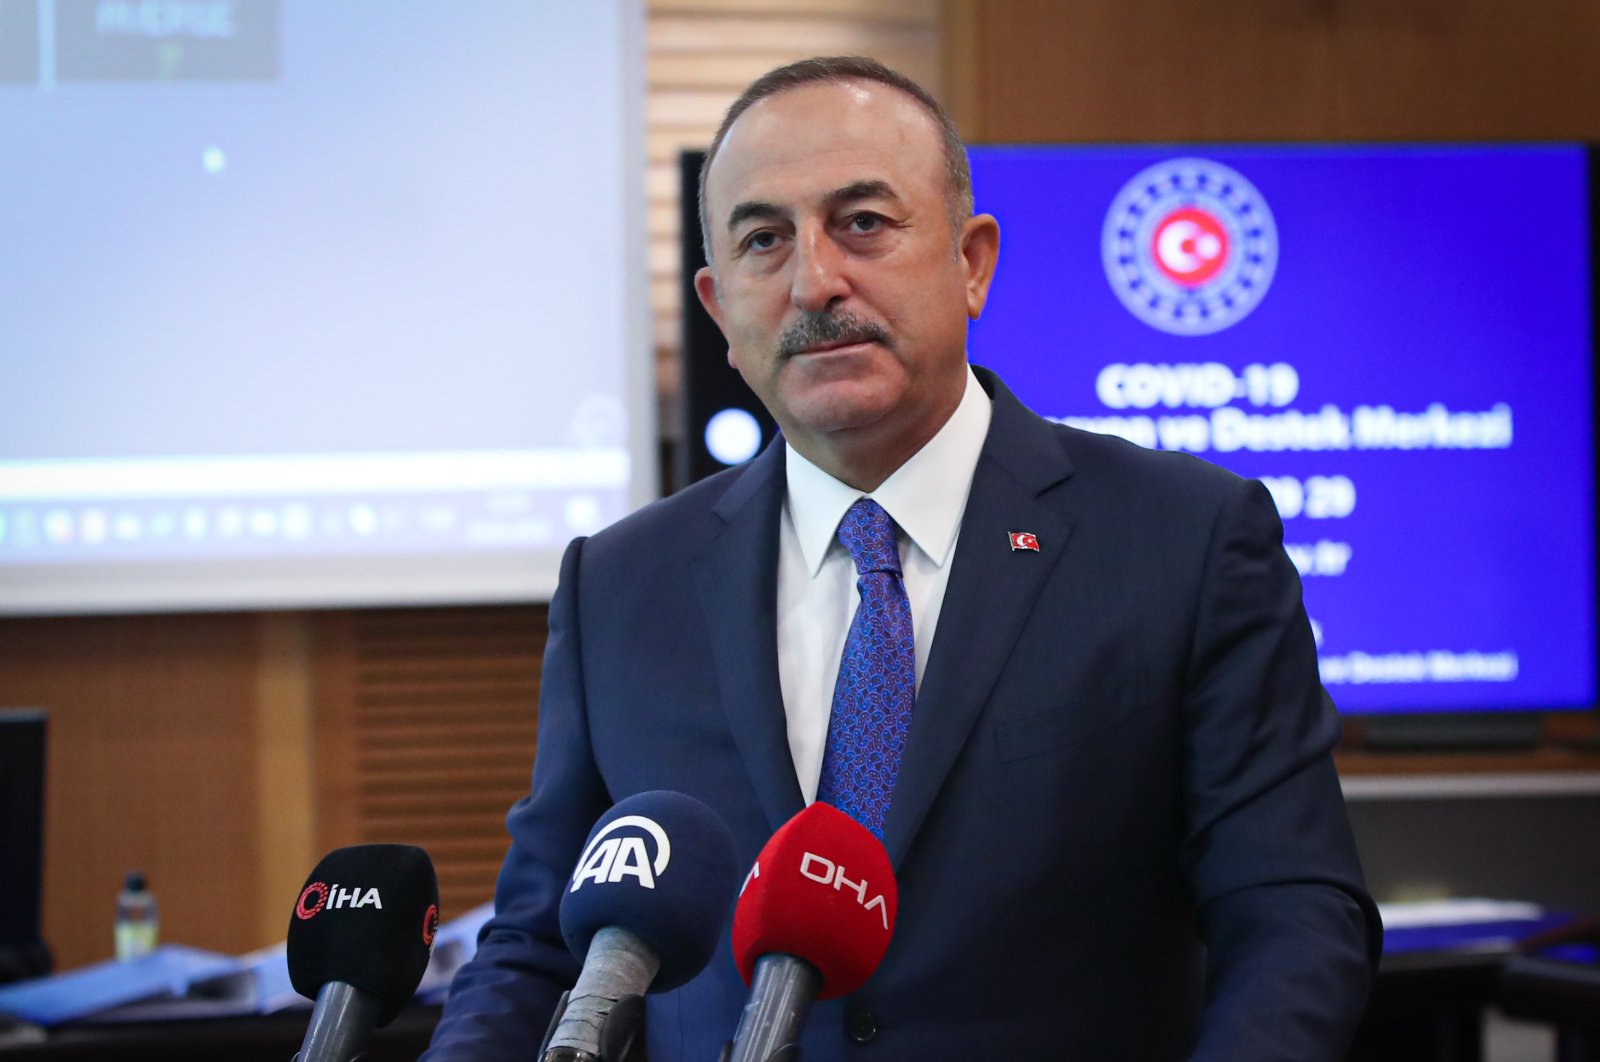 Foreign Minister Çavuşoğlu during a press conference in Ankara, May 12, 2020. (AA Photo)